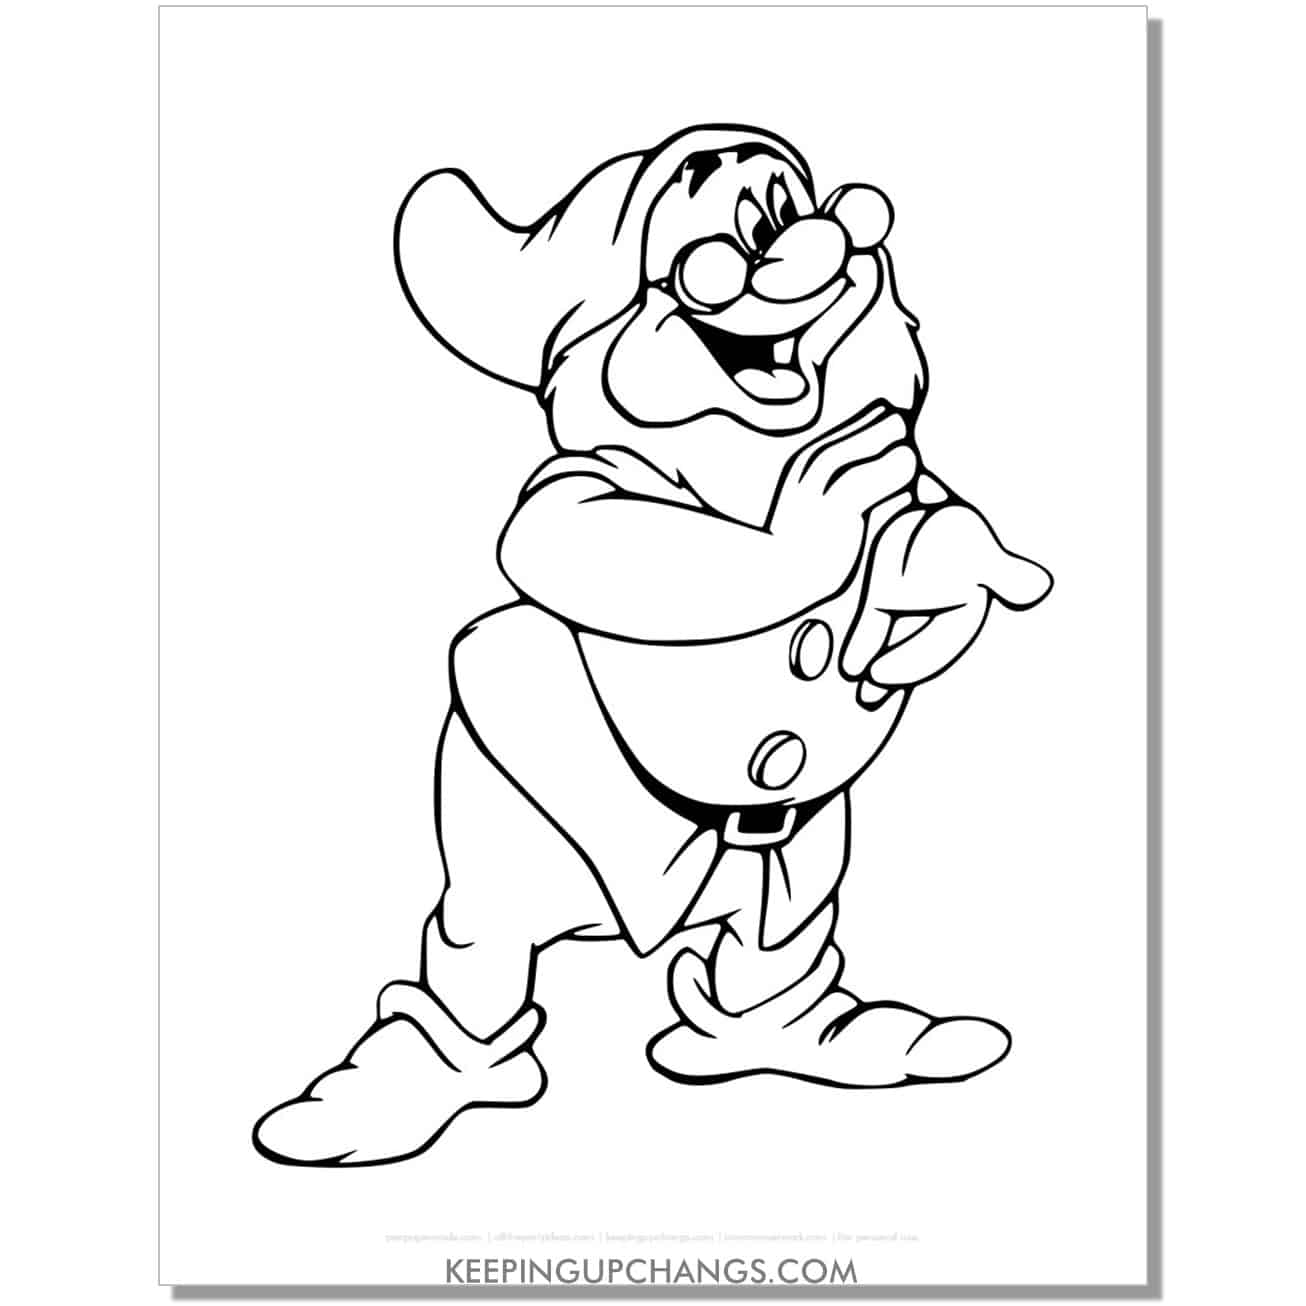 snow white dwarf doc clapping coloring page, sheet.